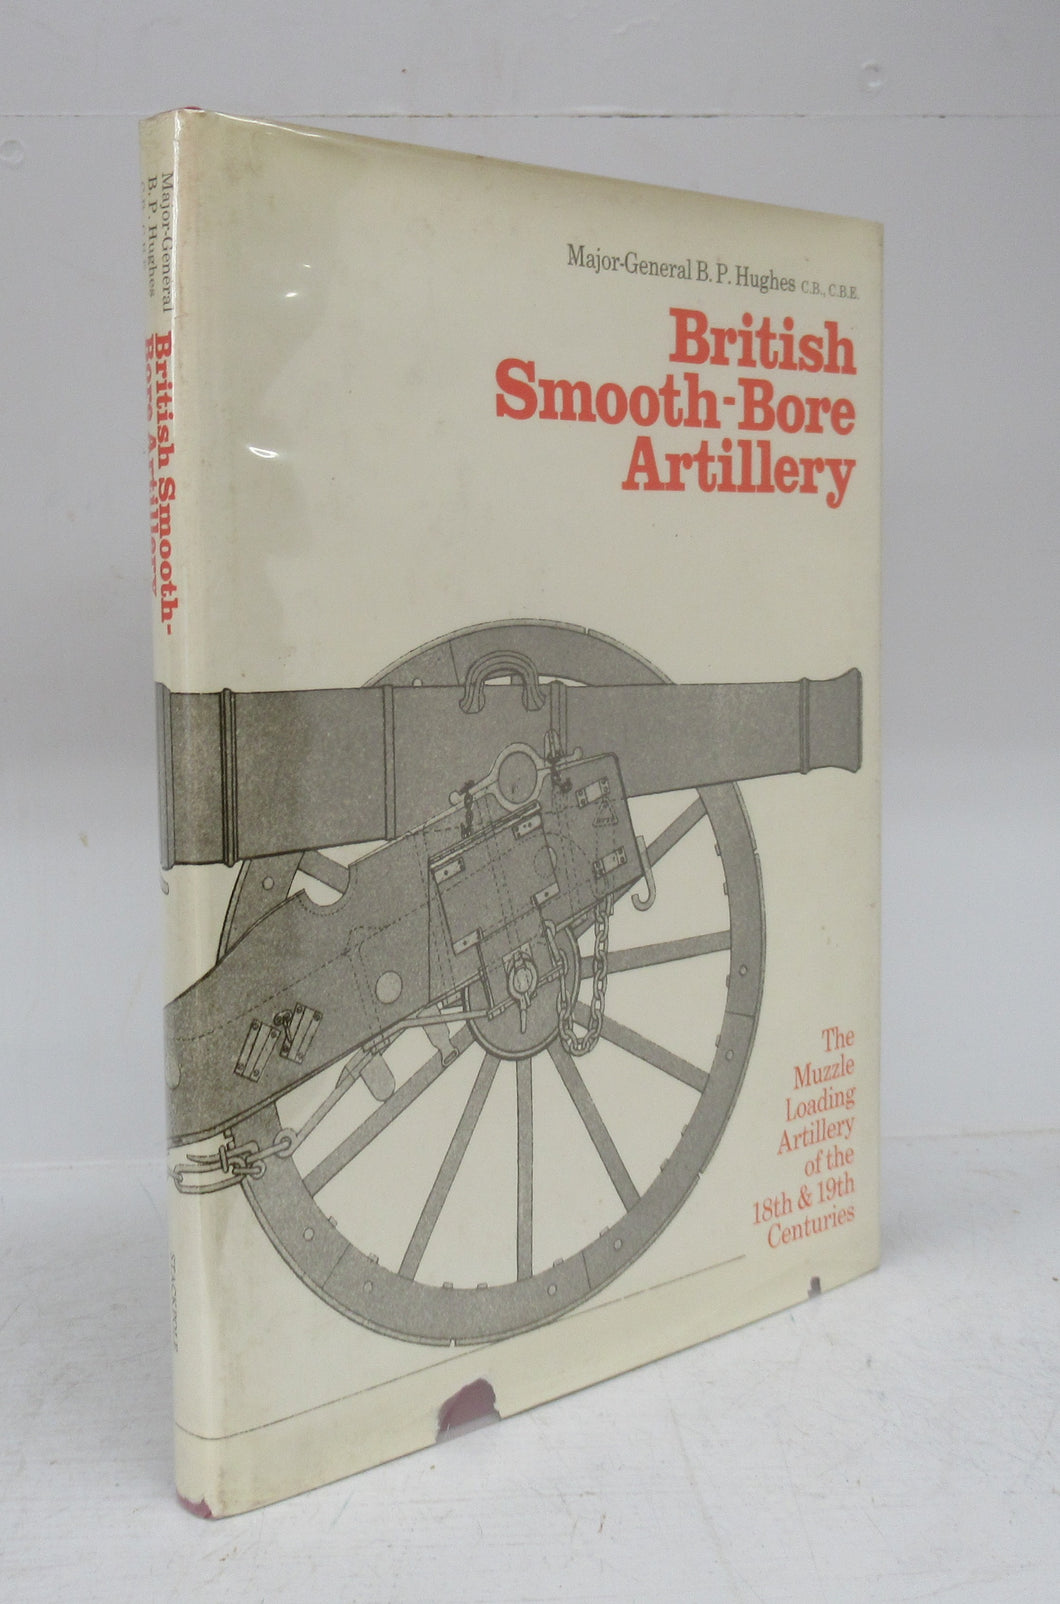 British Smooth-Bore Artillery: The Muzzle Loading Artillery of the 18th & 19th Centuries